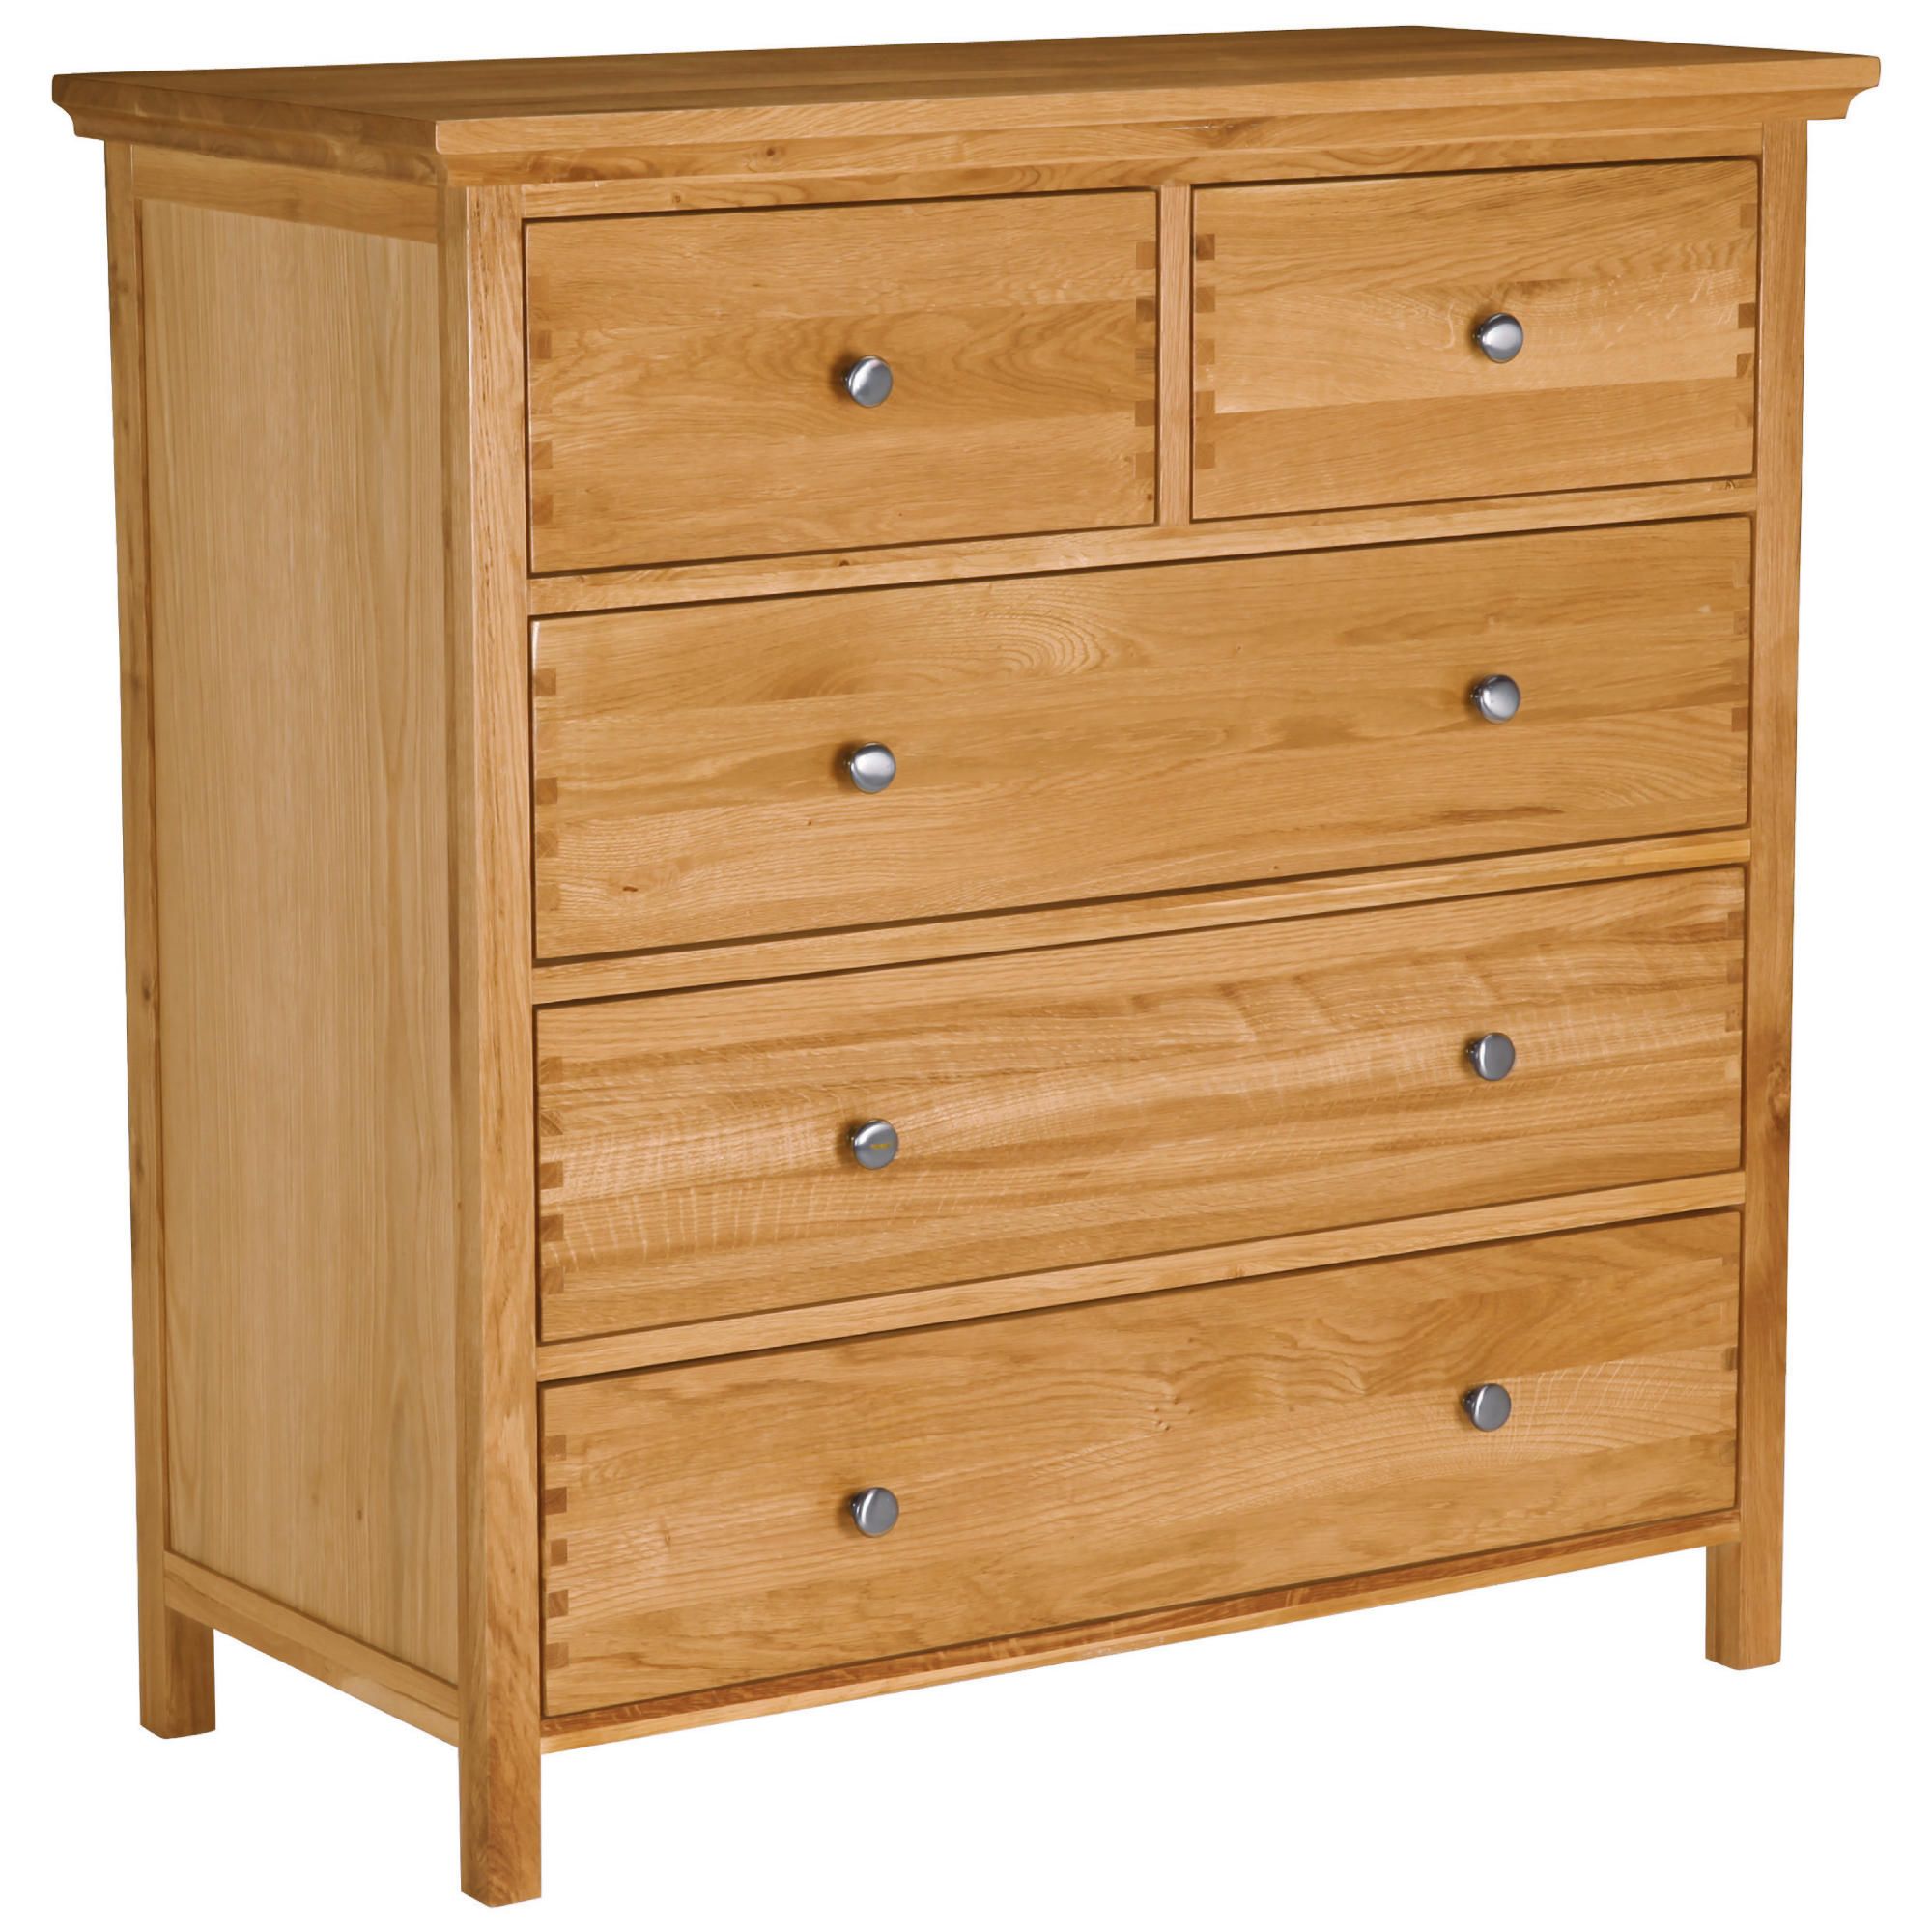 Hampstead 5 Drawer Chest Oak at Tesco Direct